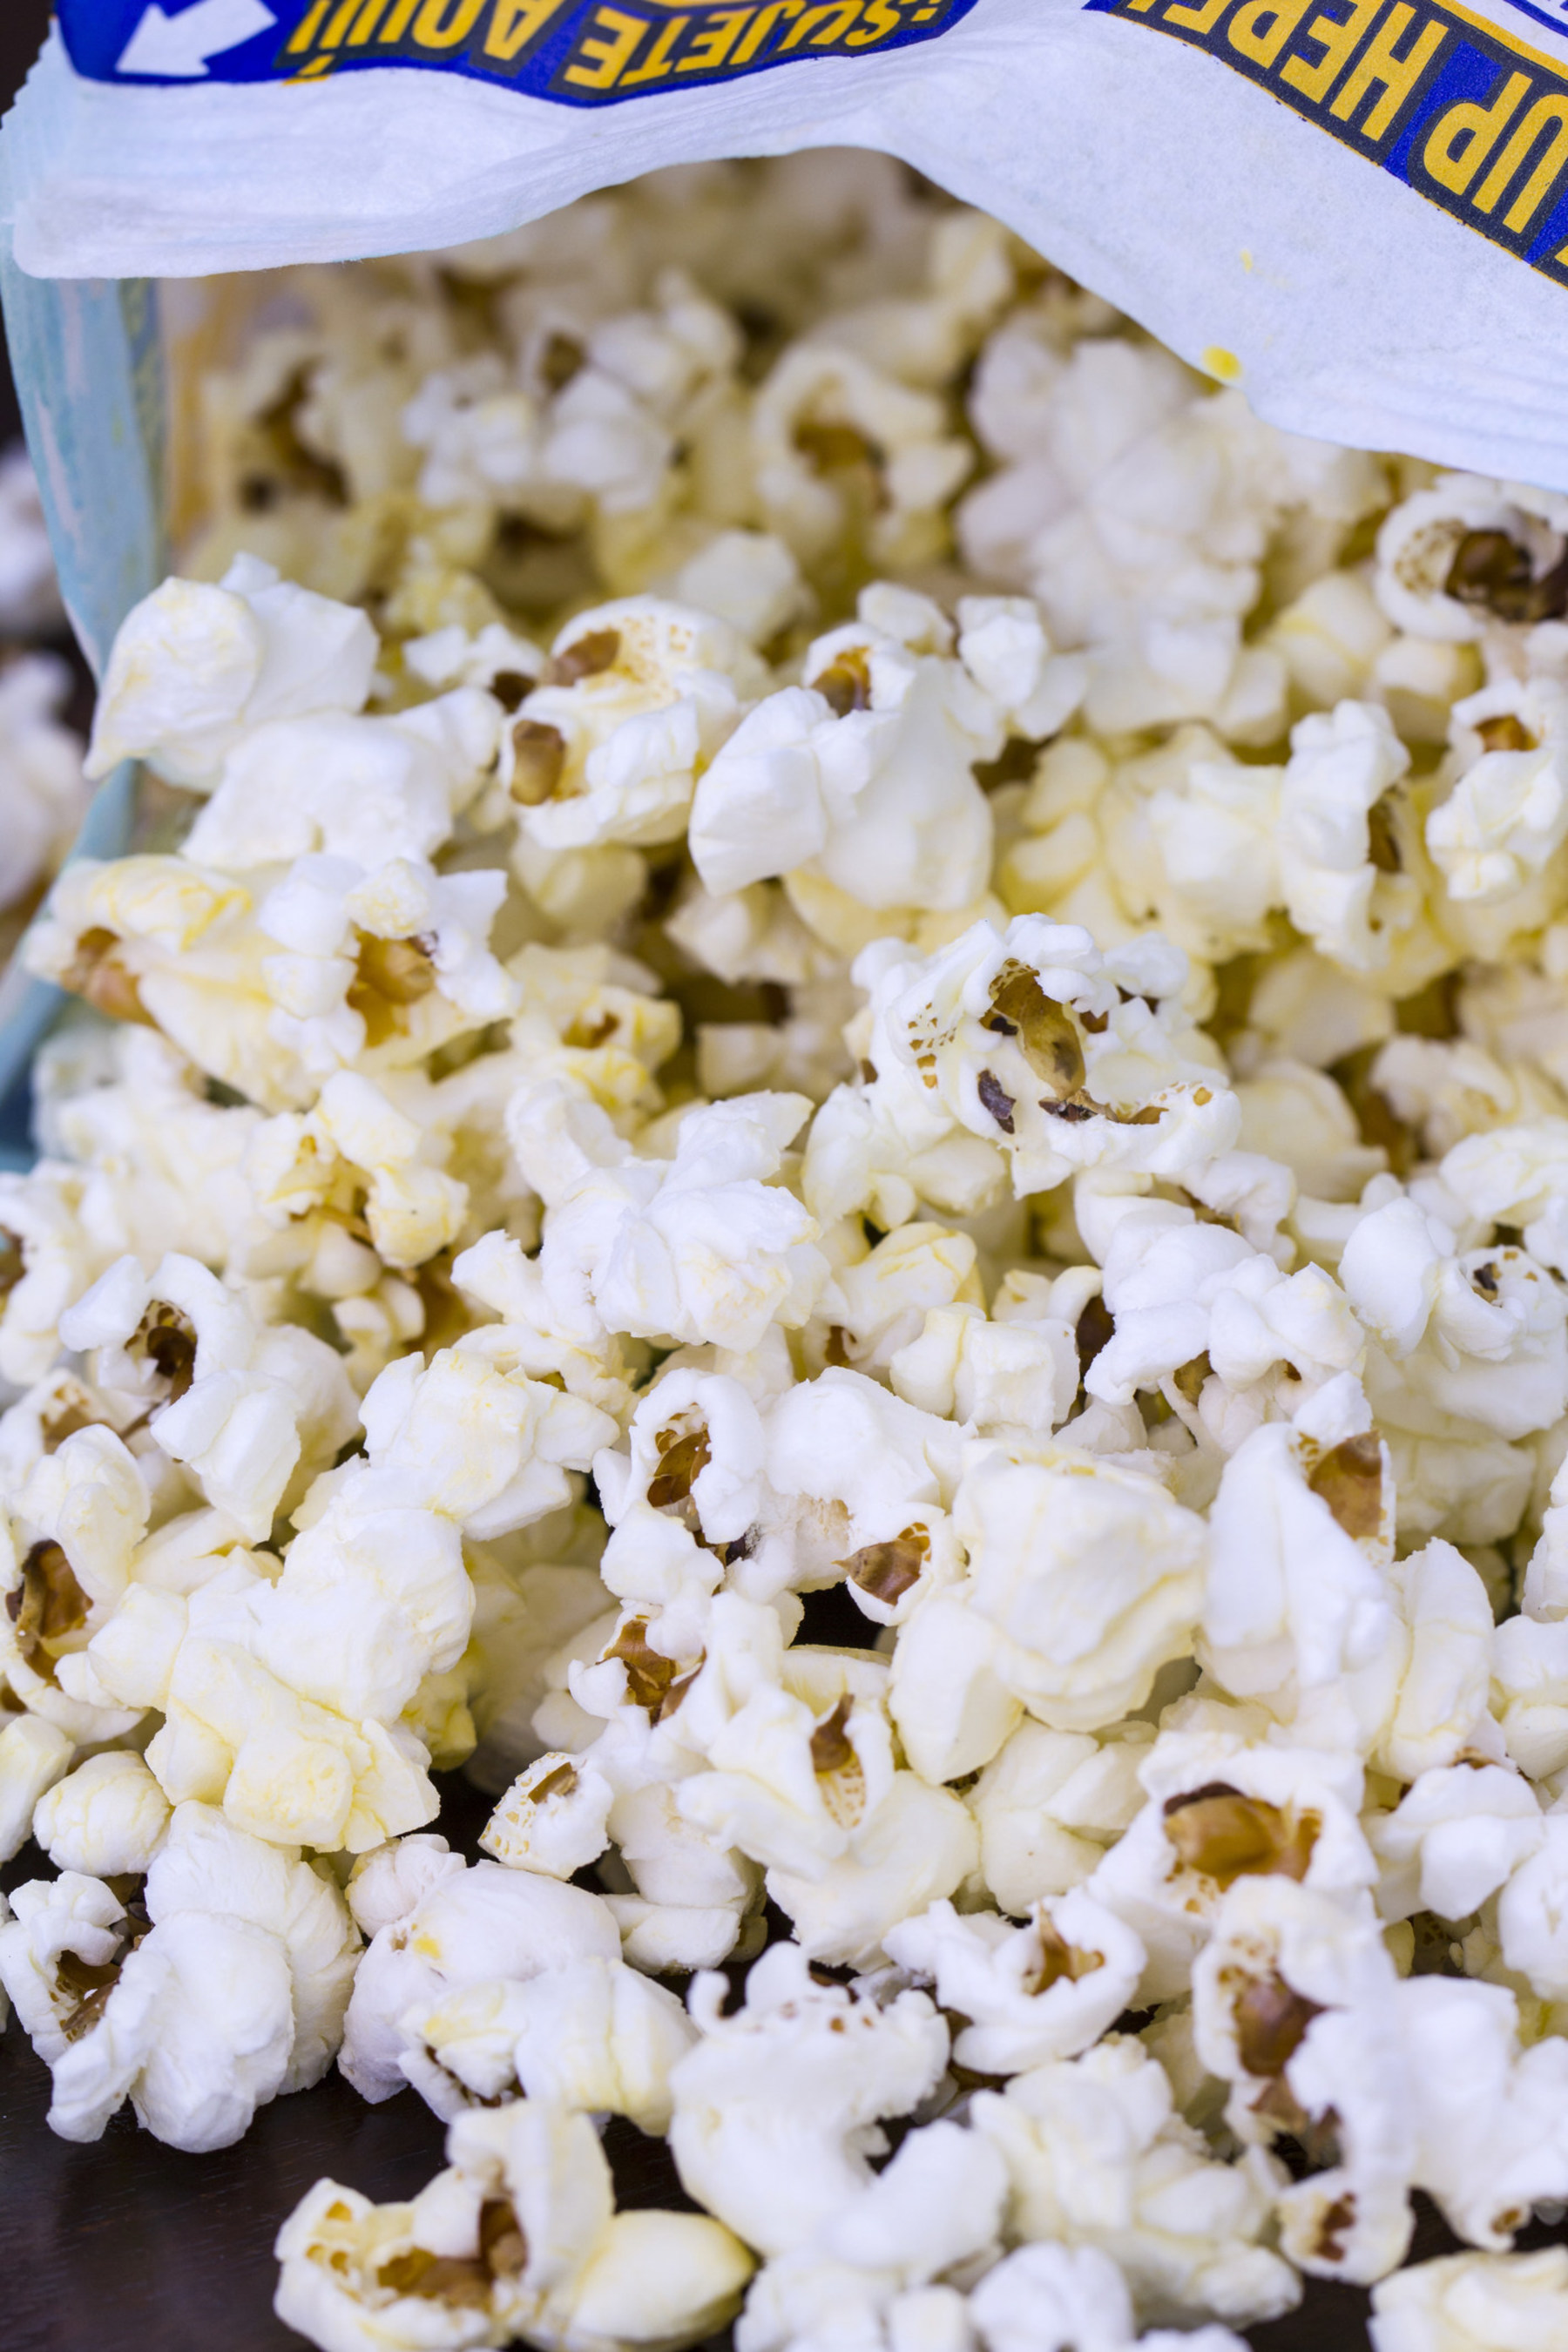 Verso Offers Microwave Popcorn Bag Producers an Attractive New Option with GlazeArmor(TM) Micro Papers